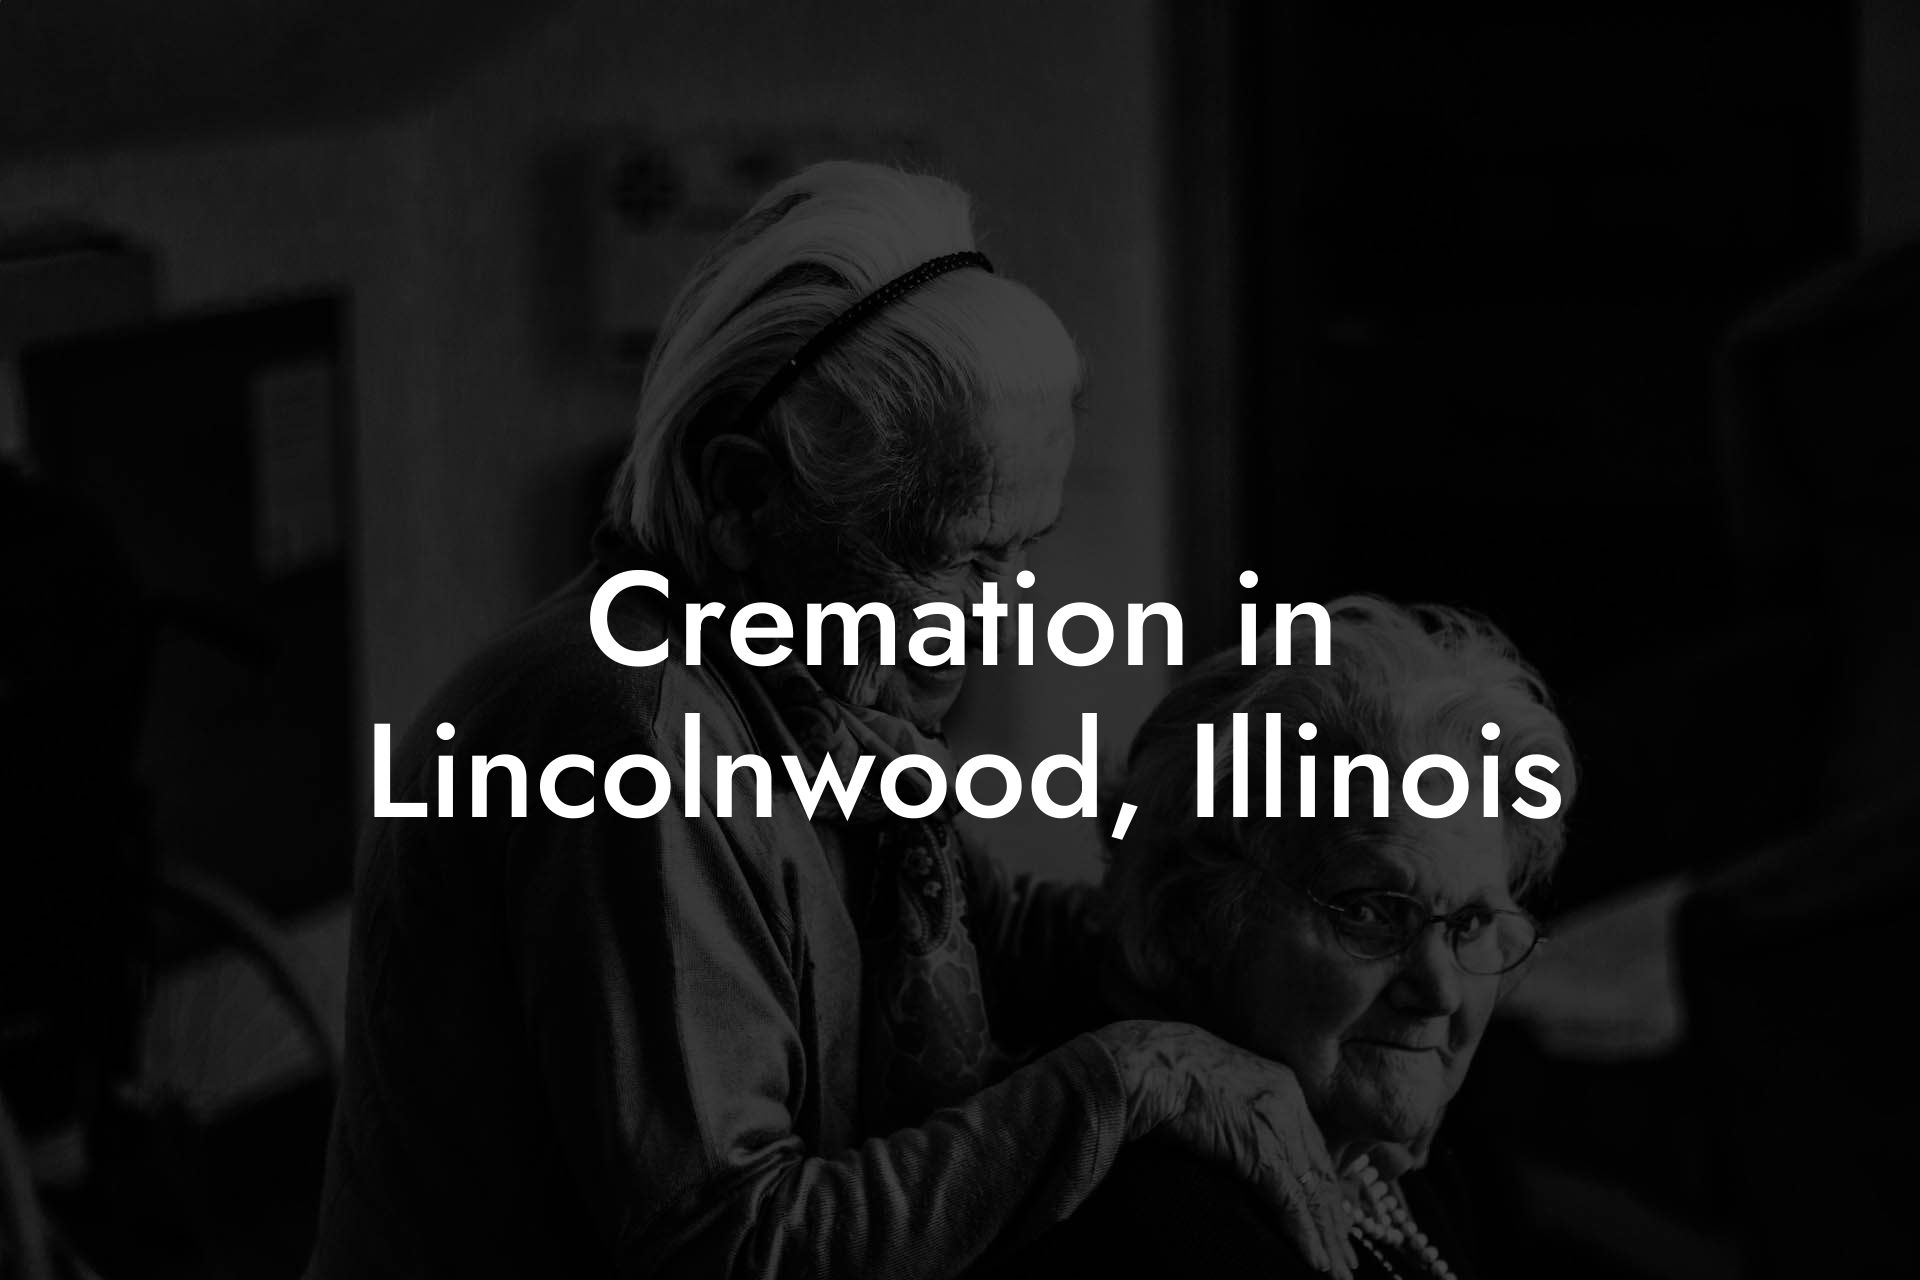 Cremation in Lincolnwood, Illinois